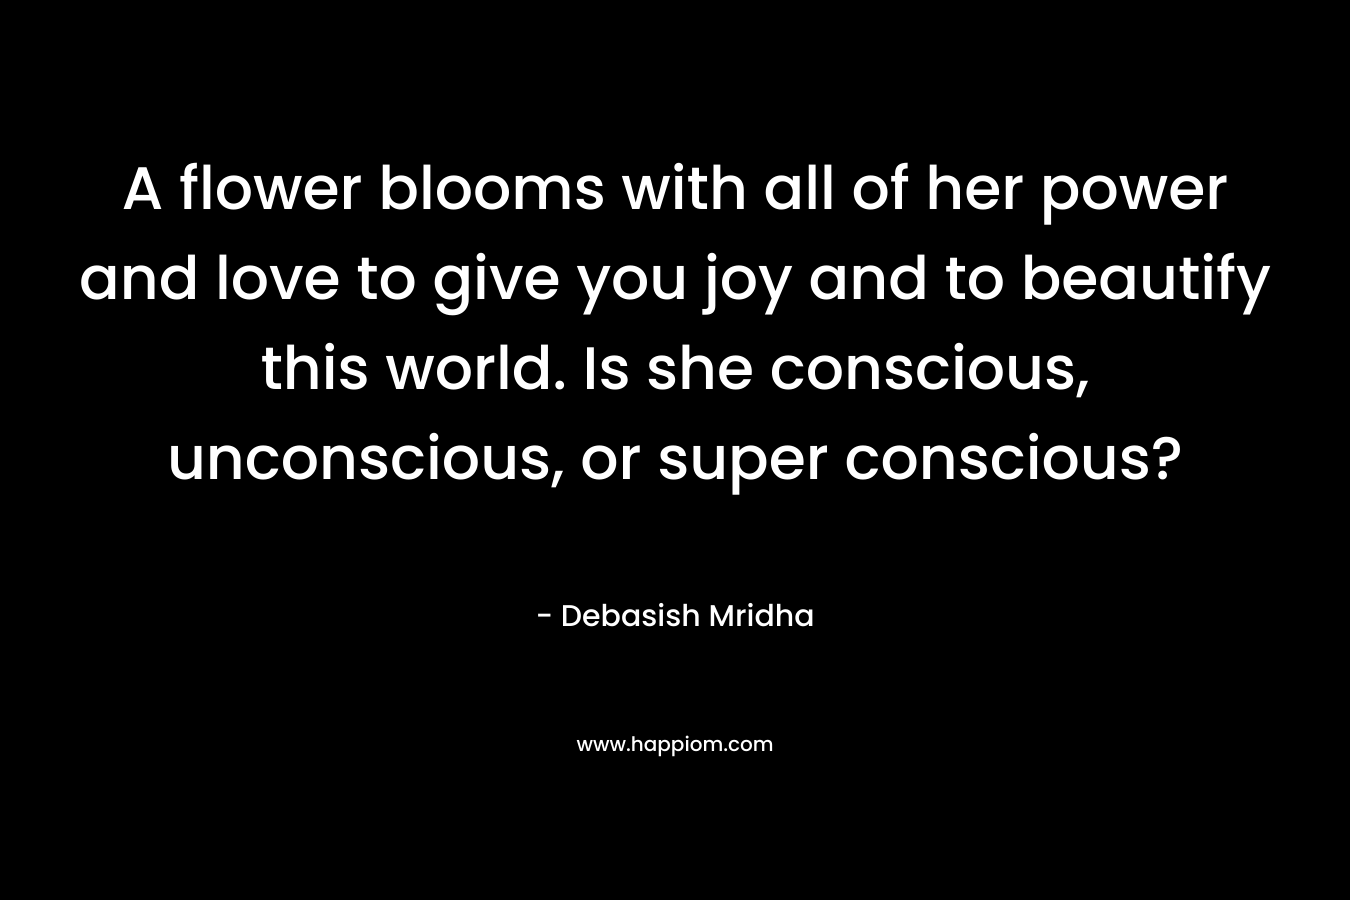 A flower blooms with all of her power and love to give you joy and to beautify this world. Is she conscious, unconscious, or super conscious? – Debasish Mridha